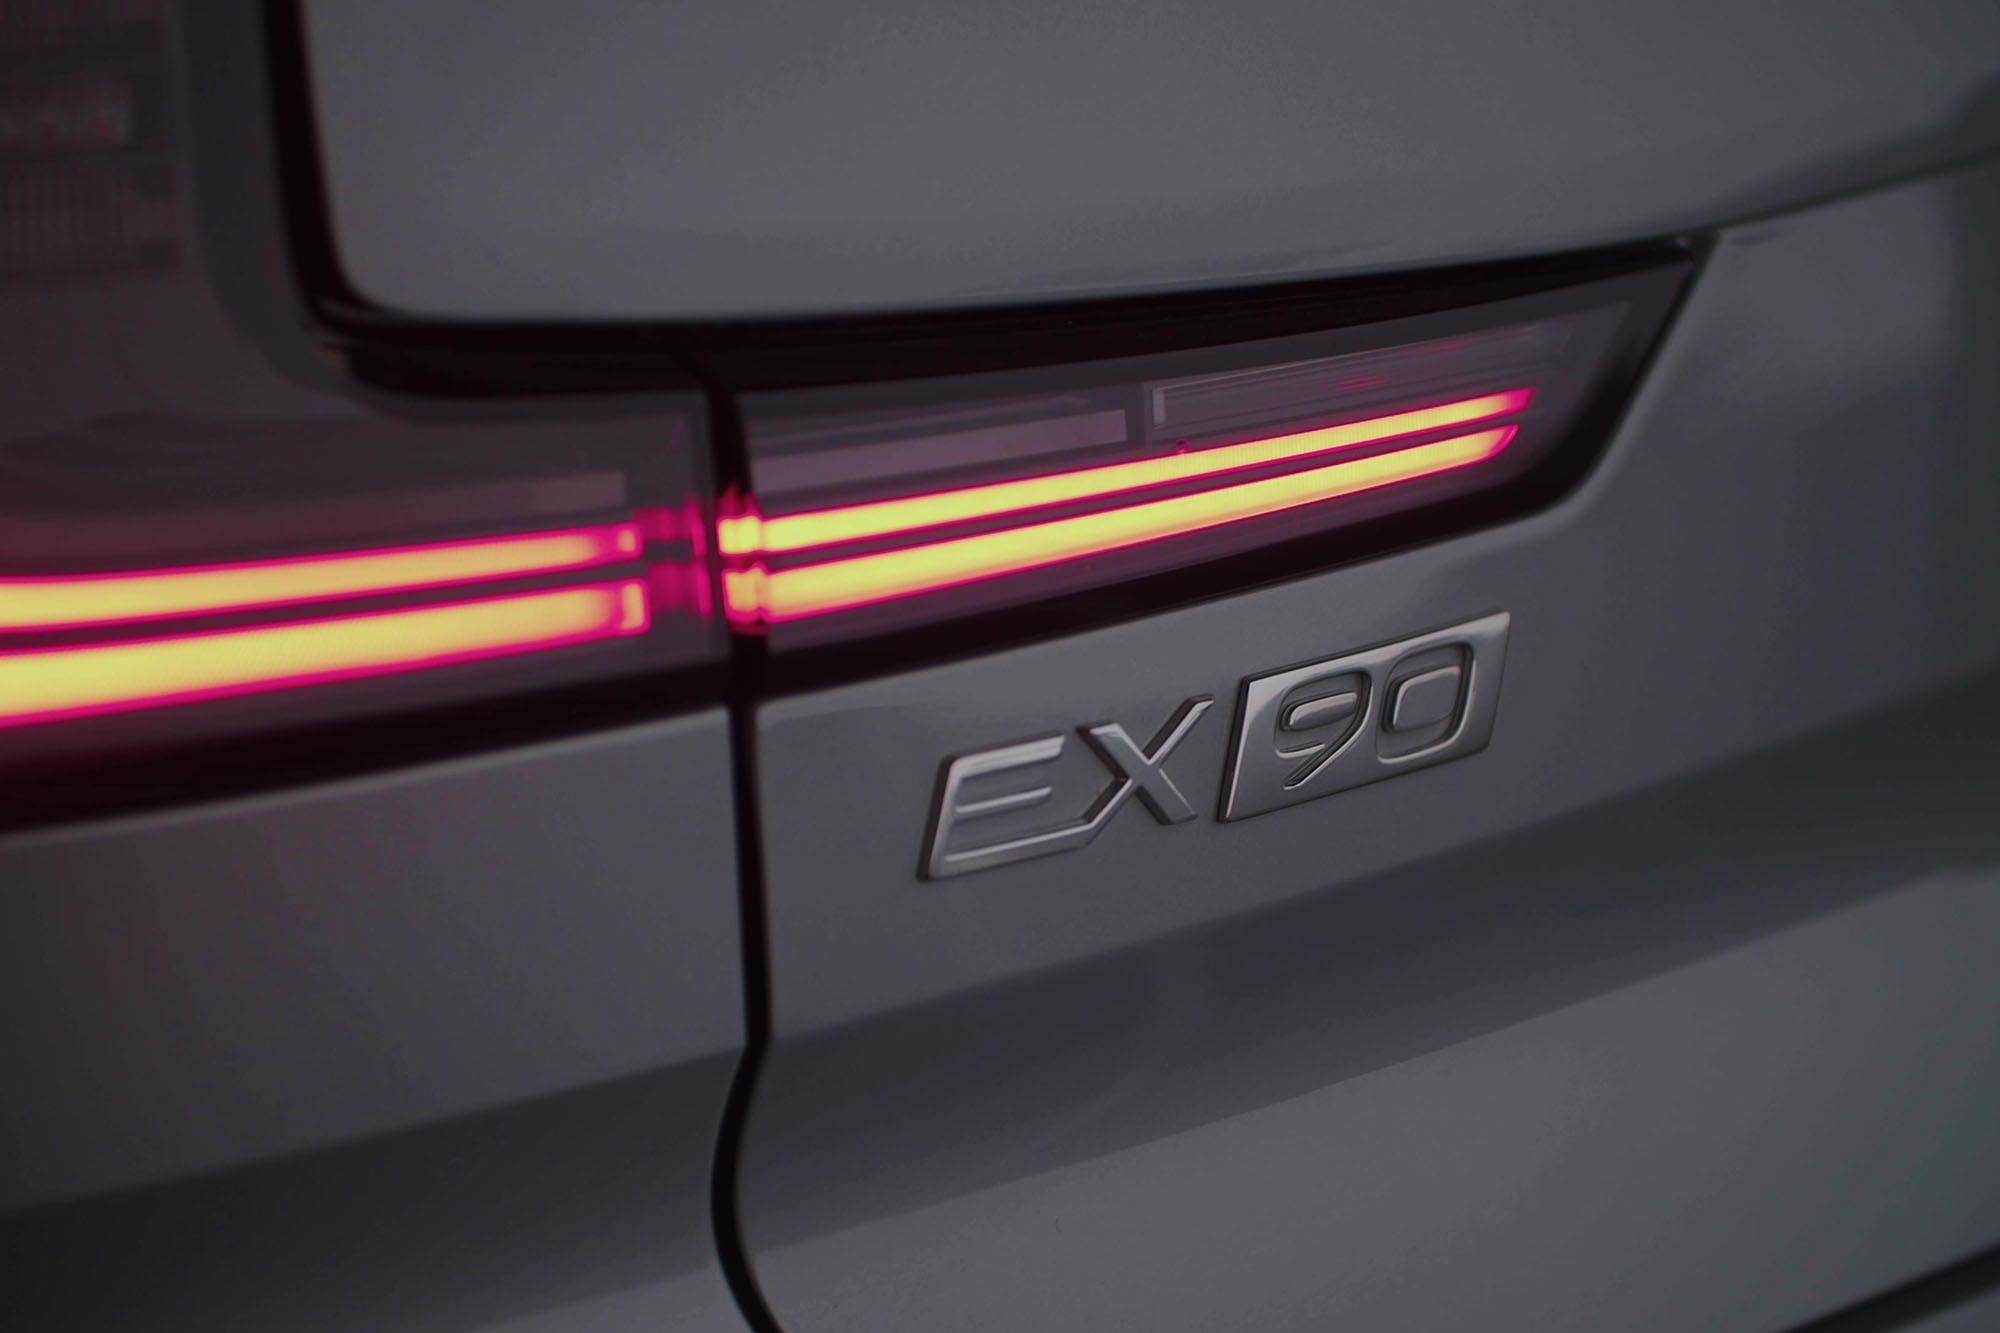 Close-up shot of the Volvo EX90 badge.